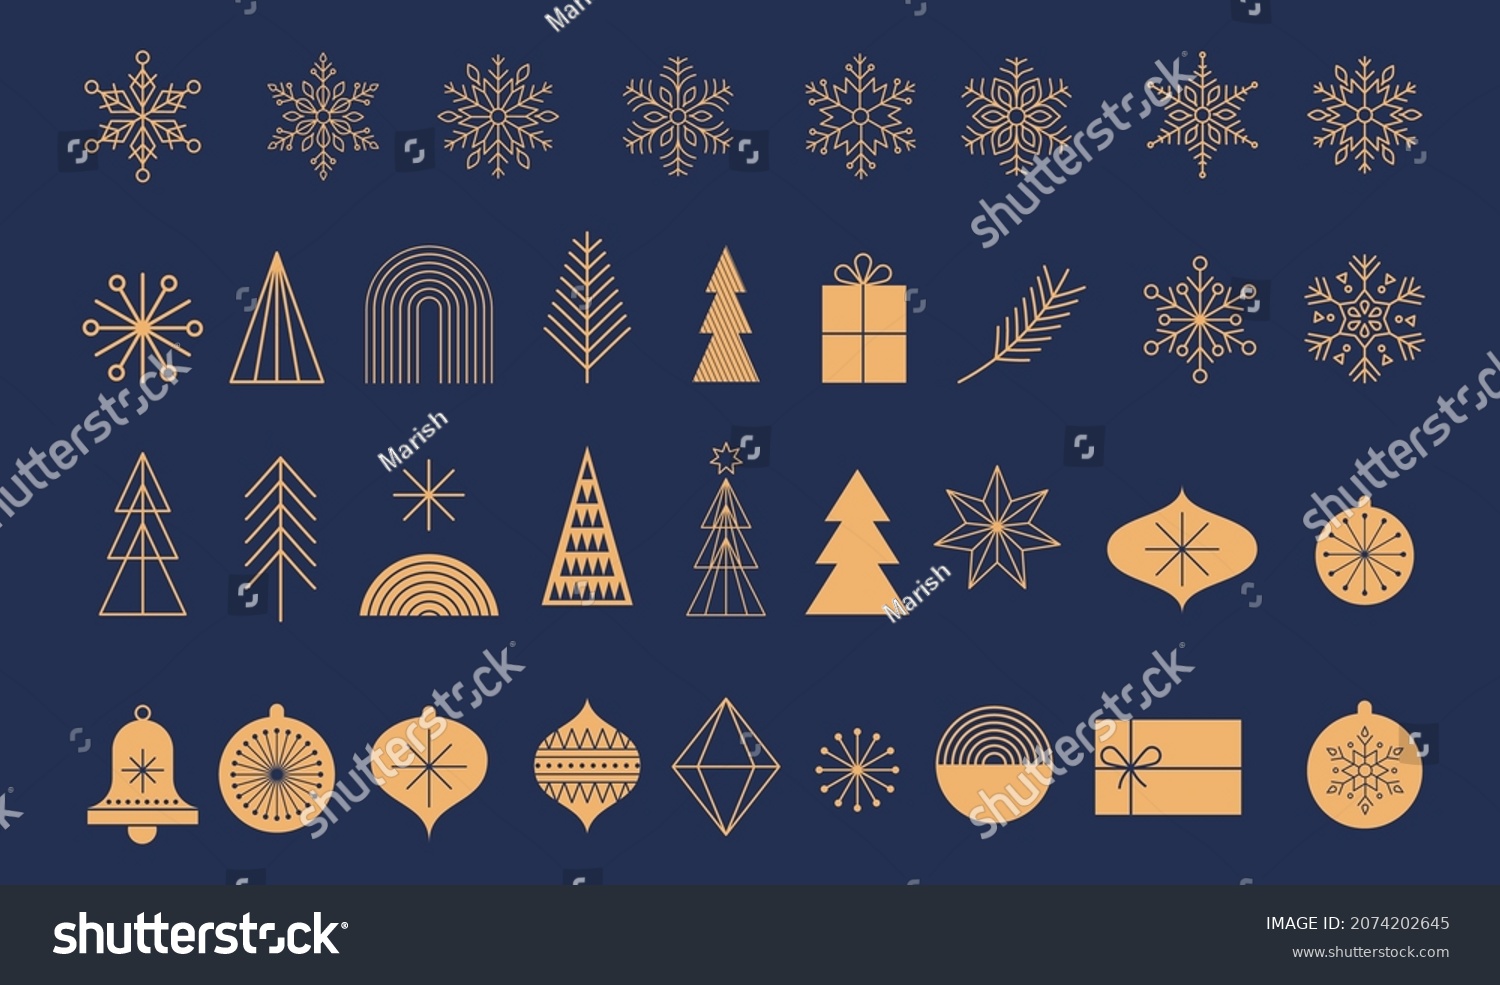 Simple Christmas background, golden geometric minimalist elements and icons. Happy new year banner. Xmas tree, snowflakes, decorations elements. Retro clean concept design #2074202645